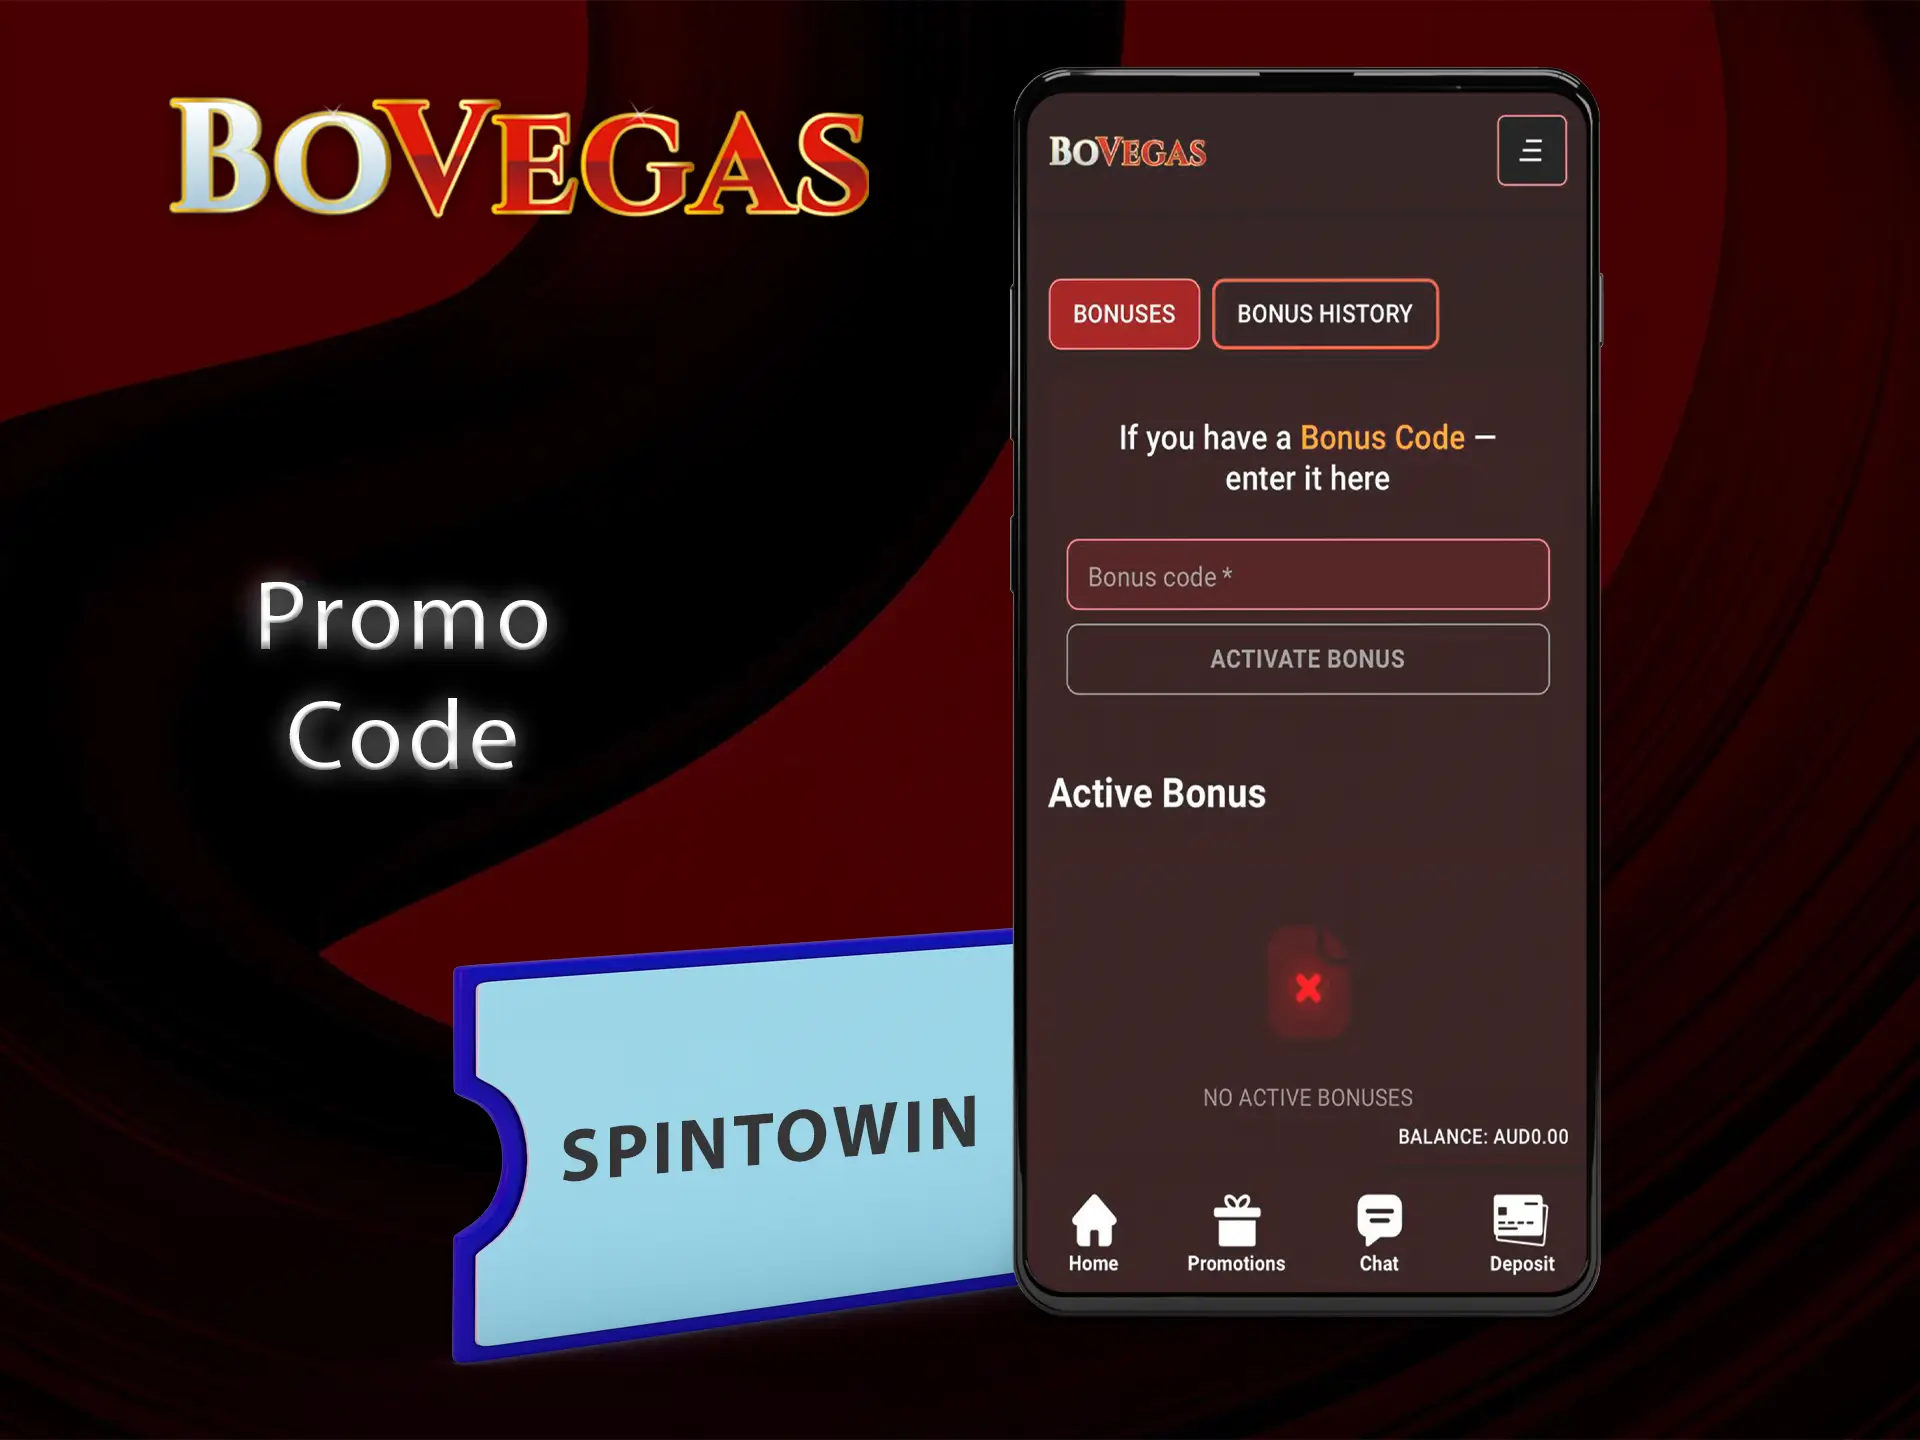 Use the promo code in the BoVegas app when registering.